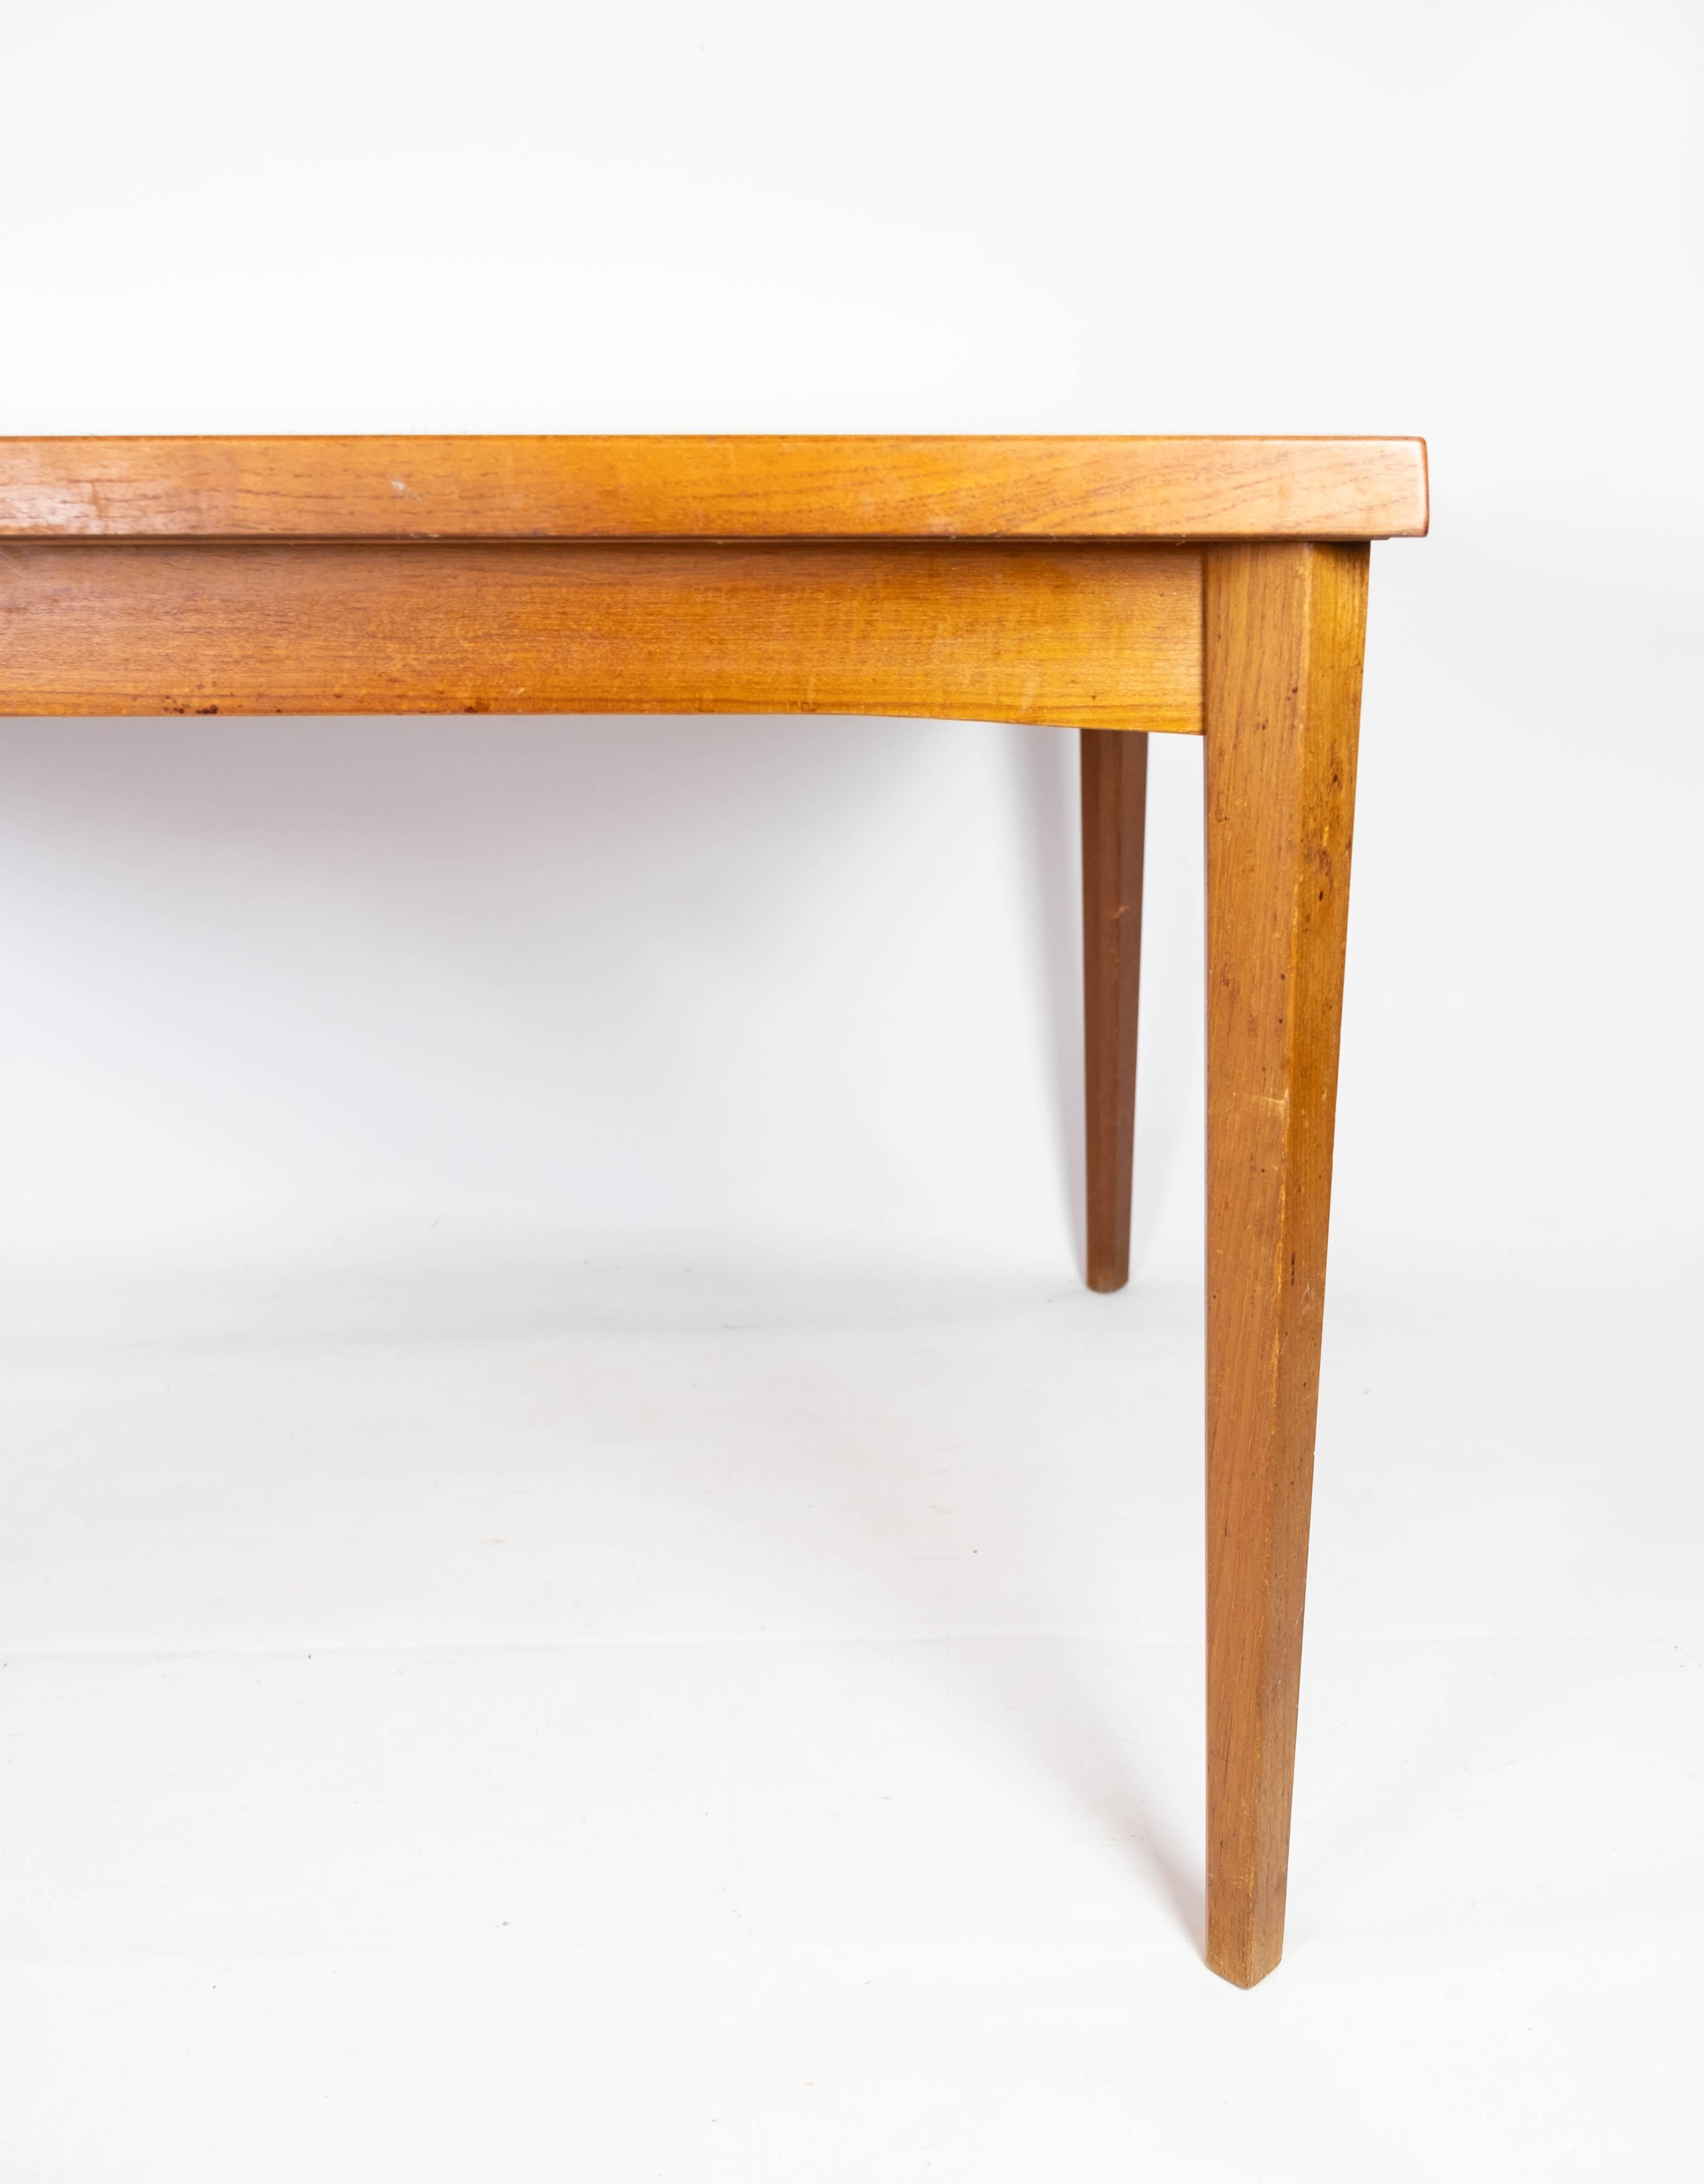 Dining Table With Extensions Made In Teak, Danish Design From 1960s In Good Condition For Sale In Lejre, DK